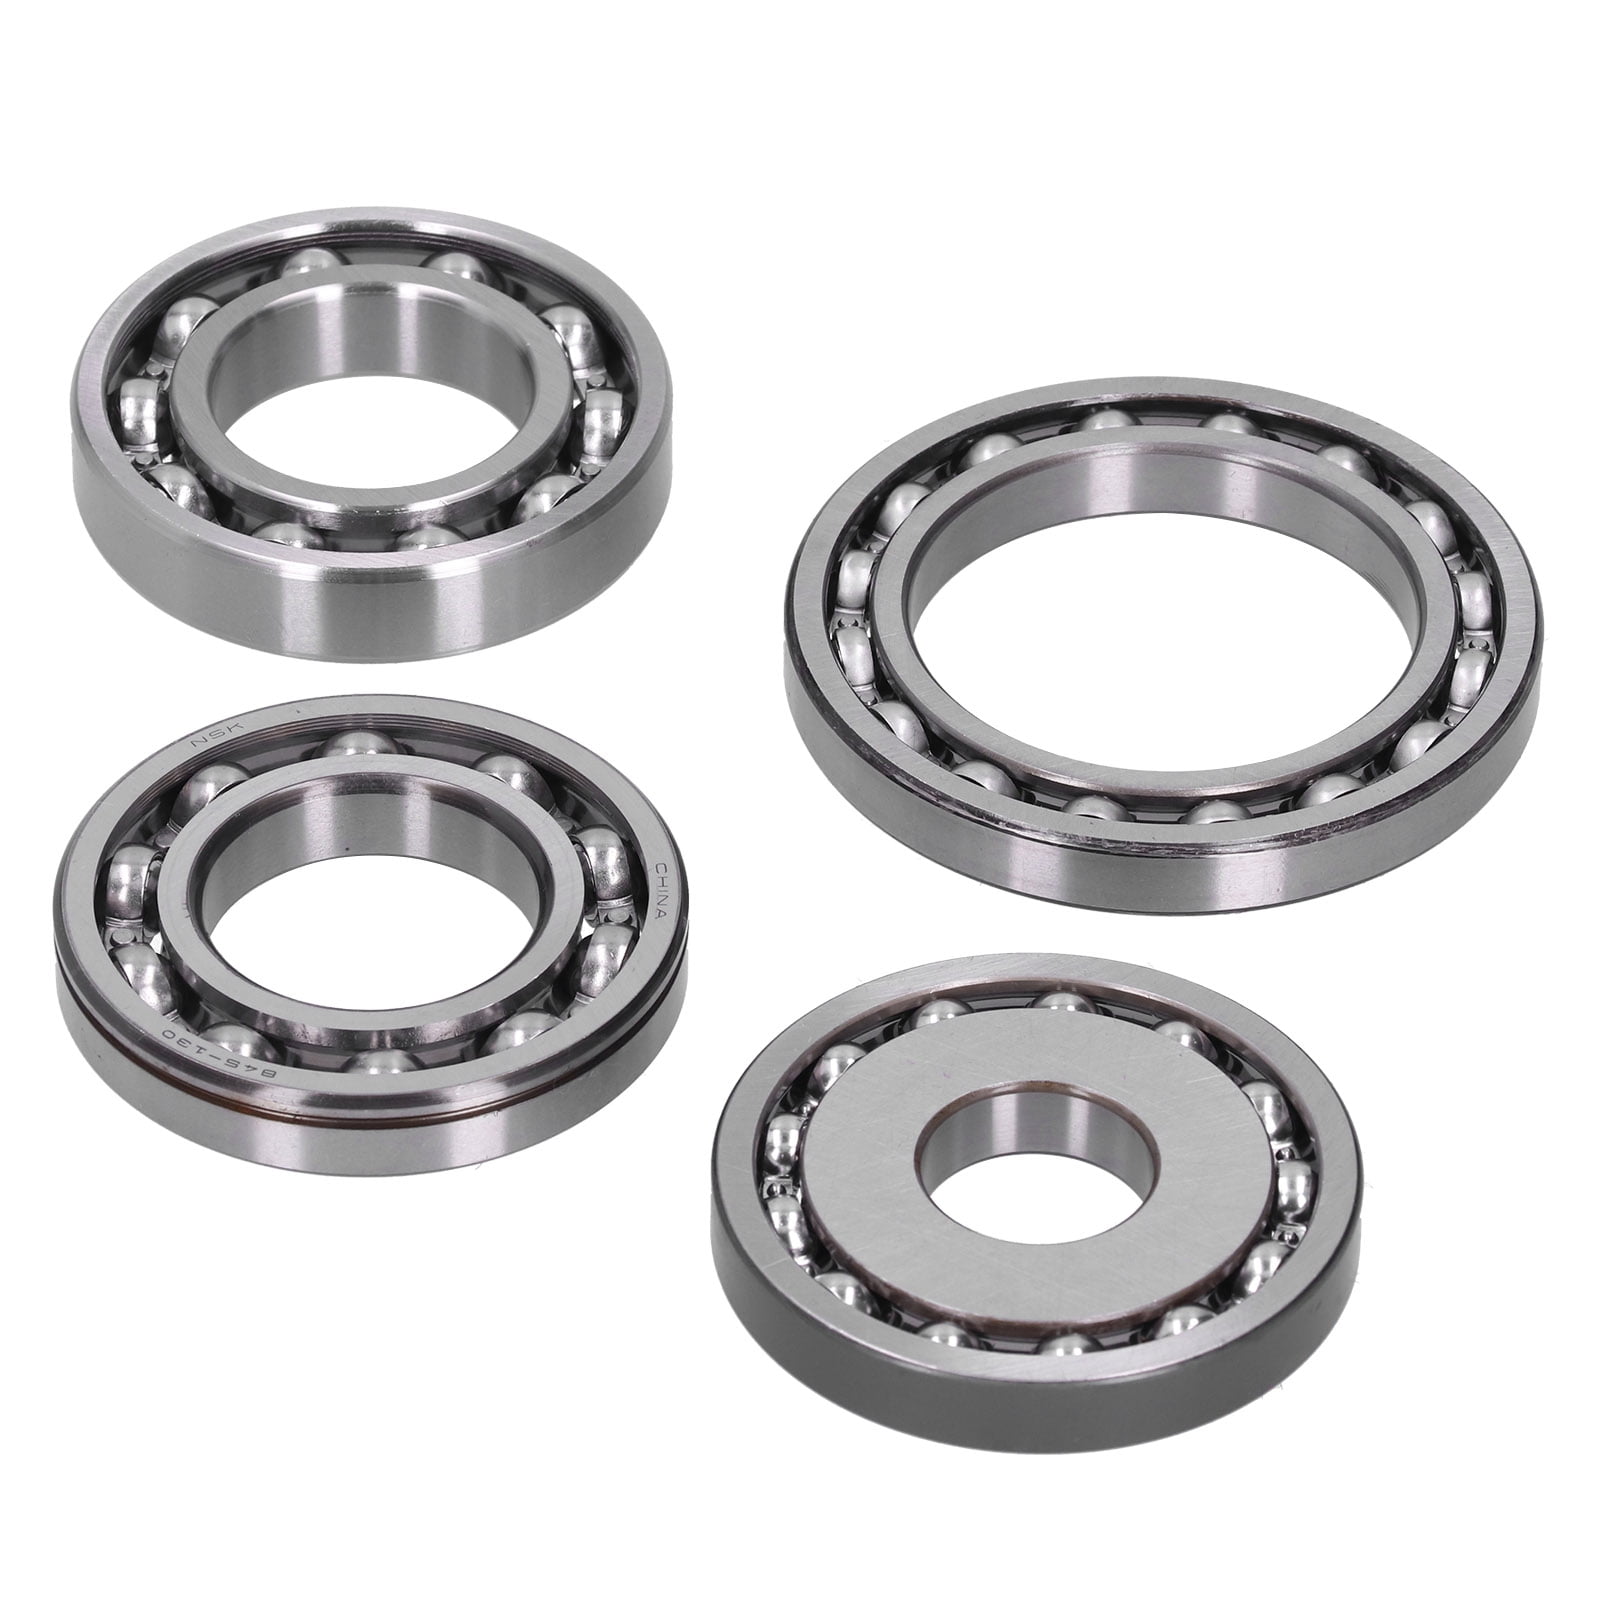 FLANGE MOUNT BEARING HOUSING WITH A 5/16" SHAFT FOR MOUNTING PULLEYS/GEARS 